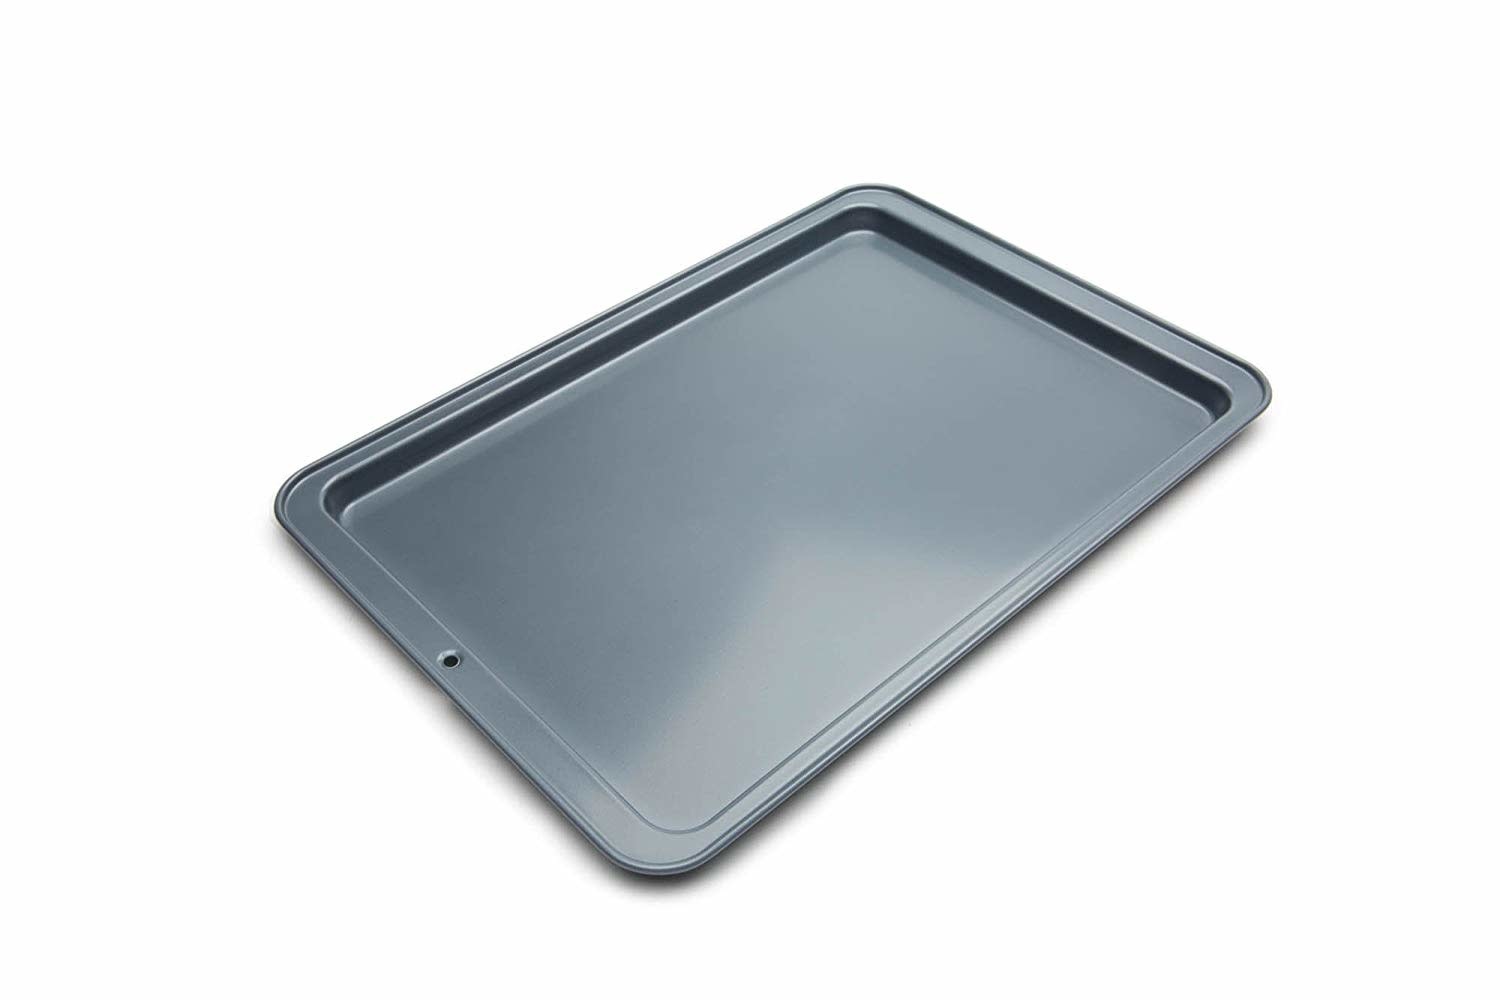 Stainless Steel Jelly Roll Baking Pan, 10x15